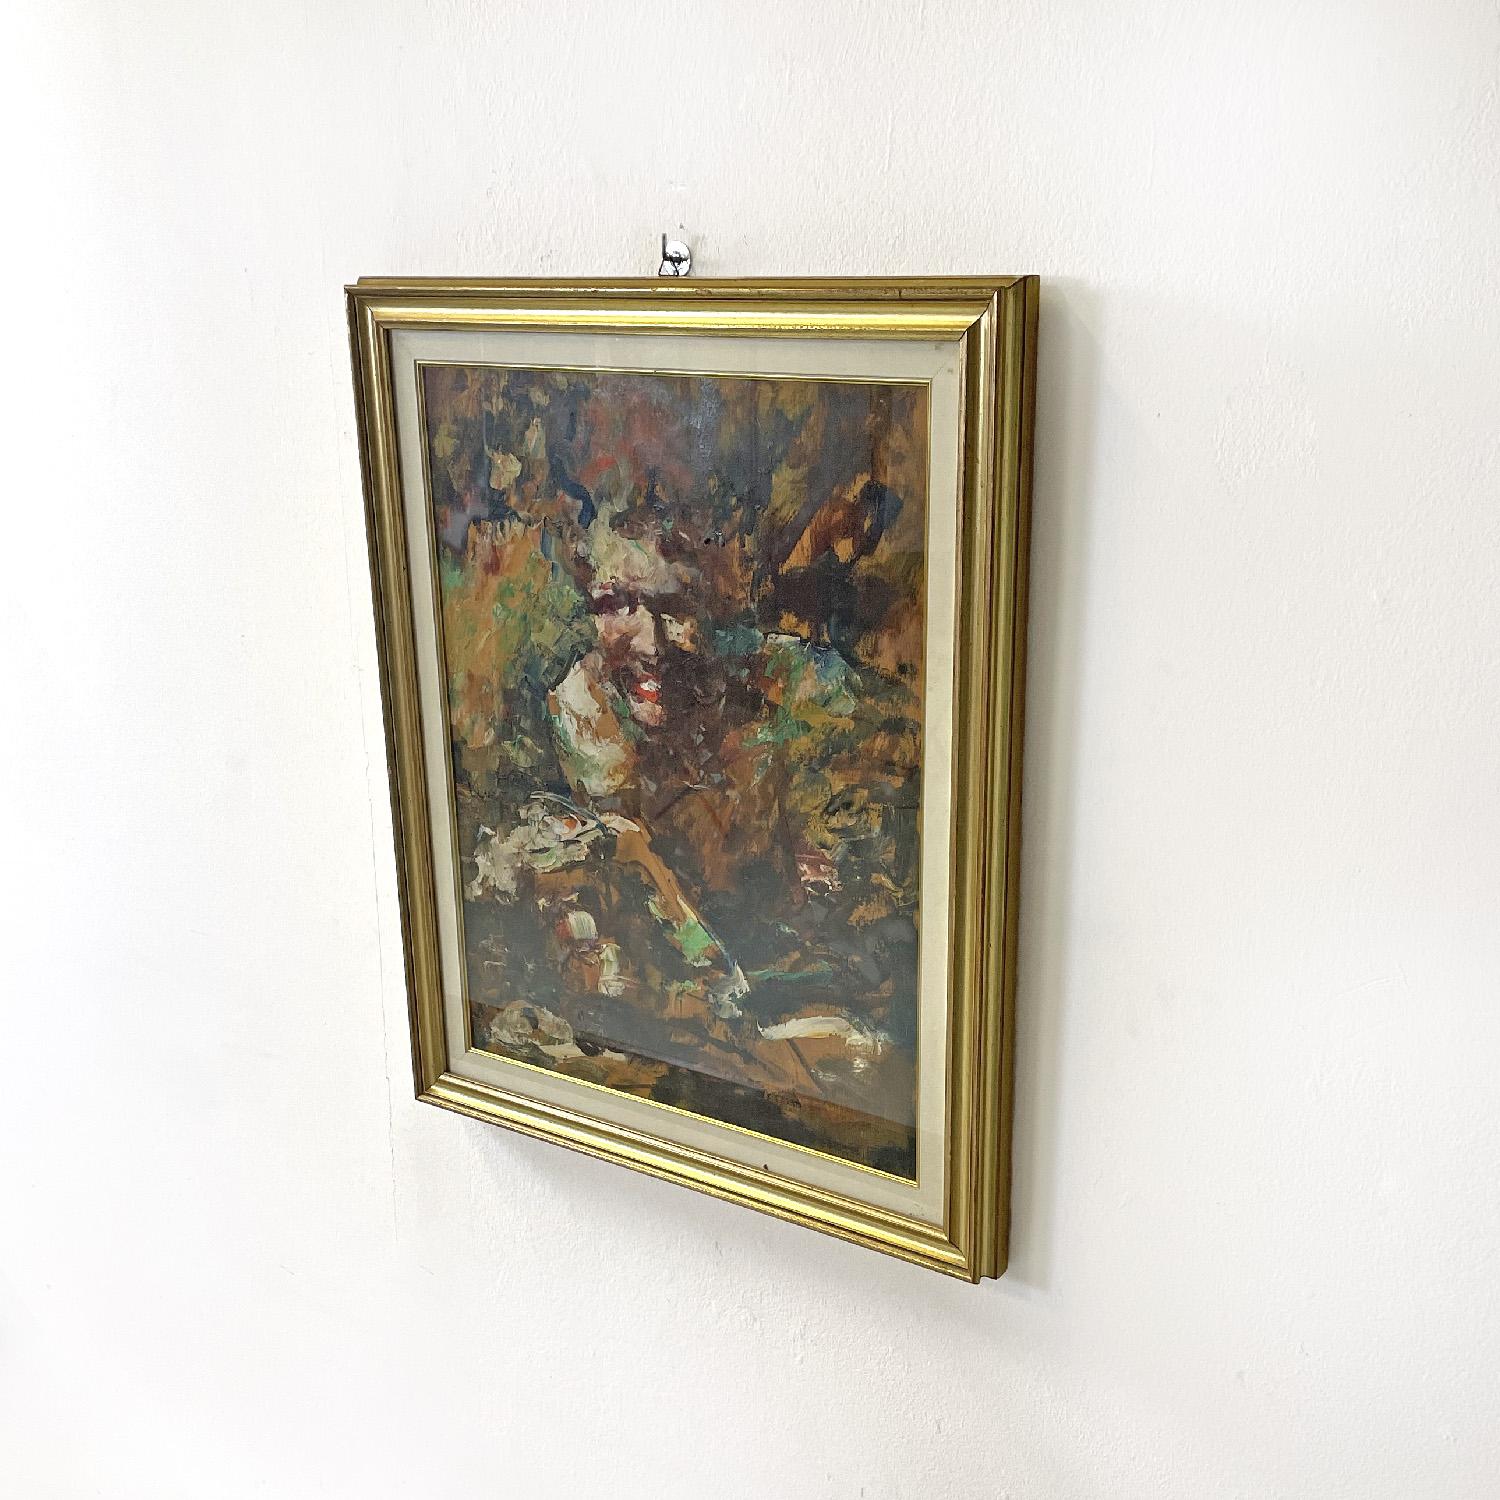 Italian mid-century modern abstract portrait painting with golden frame, 1960s
Picture with rectangular frame. The painting represents a half-length portrait rendered through material and gestural brushstrokes of various colors, ranging from warm